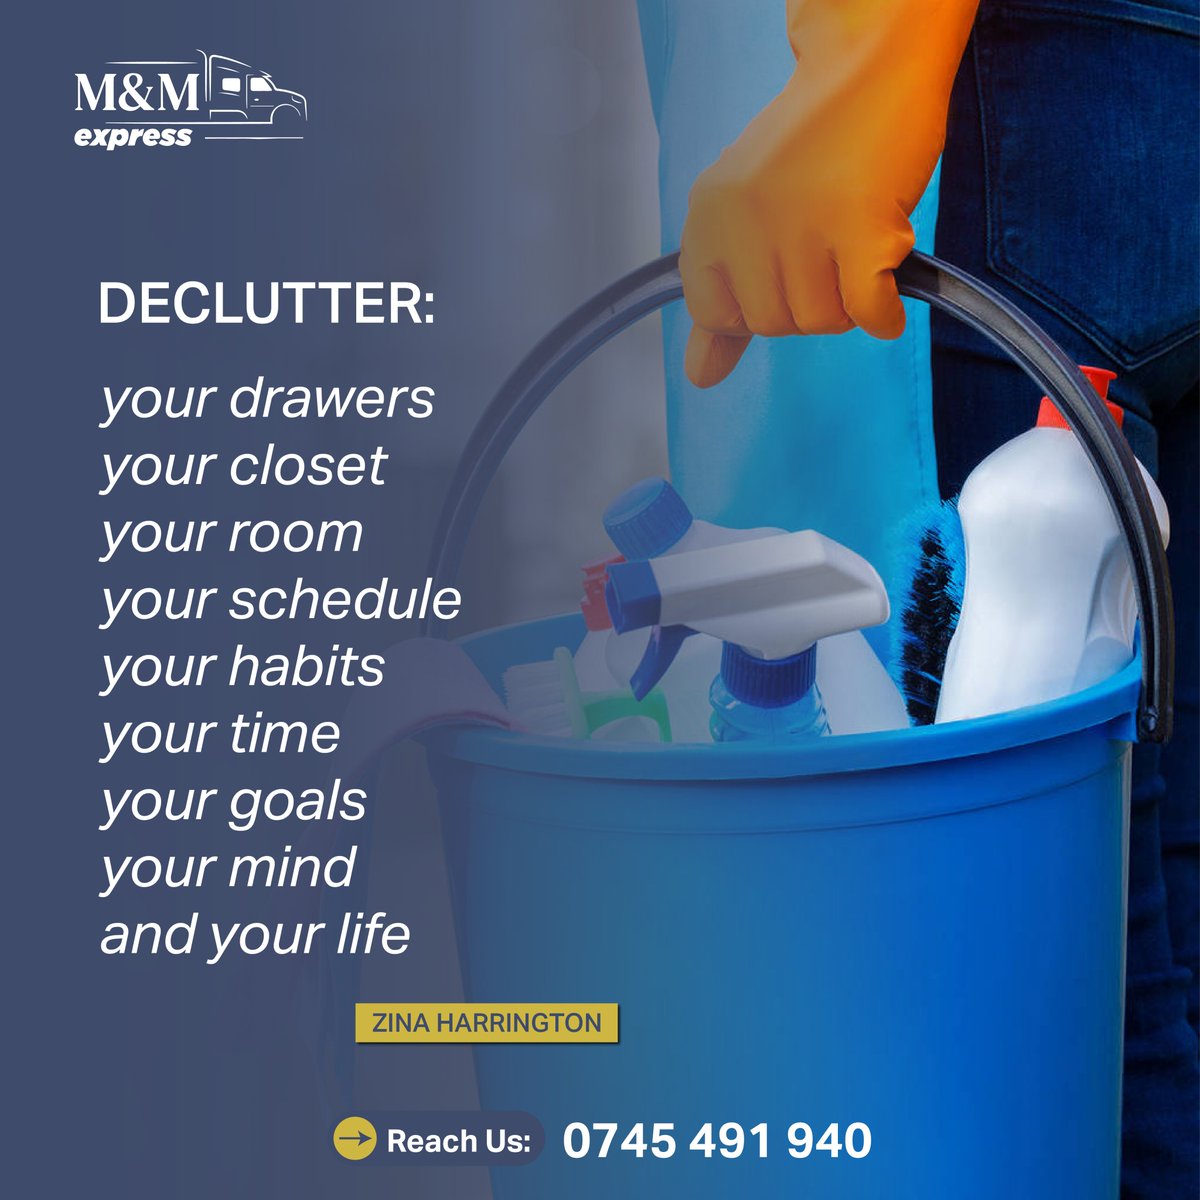 Time to declutter? Let MnM Express help you clear out the old and make space for the new! Contact us for professional decluttering services. 

#decluttering #declutteryourlife #organizewithus #organizedliving #BreakingNews